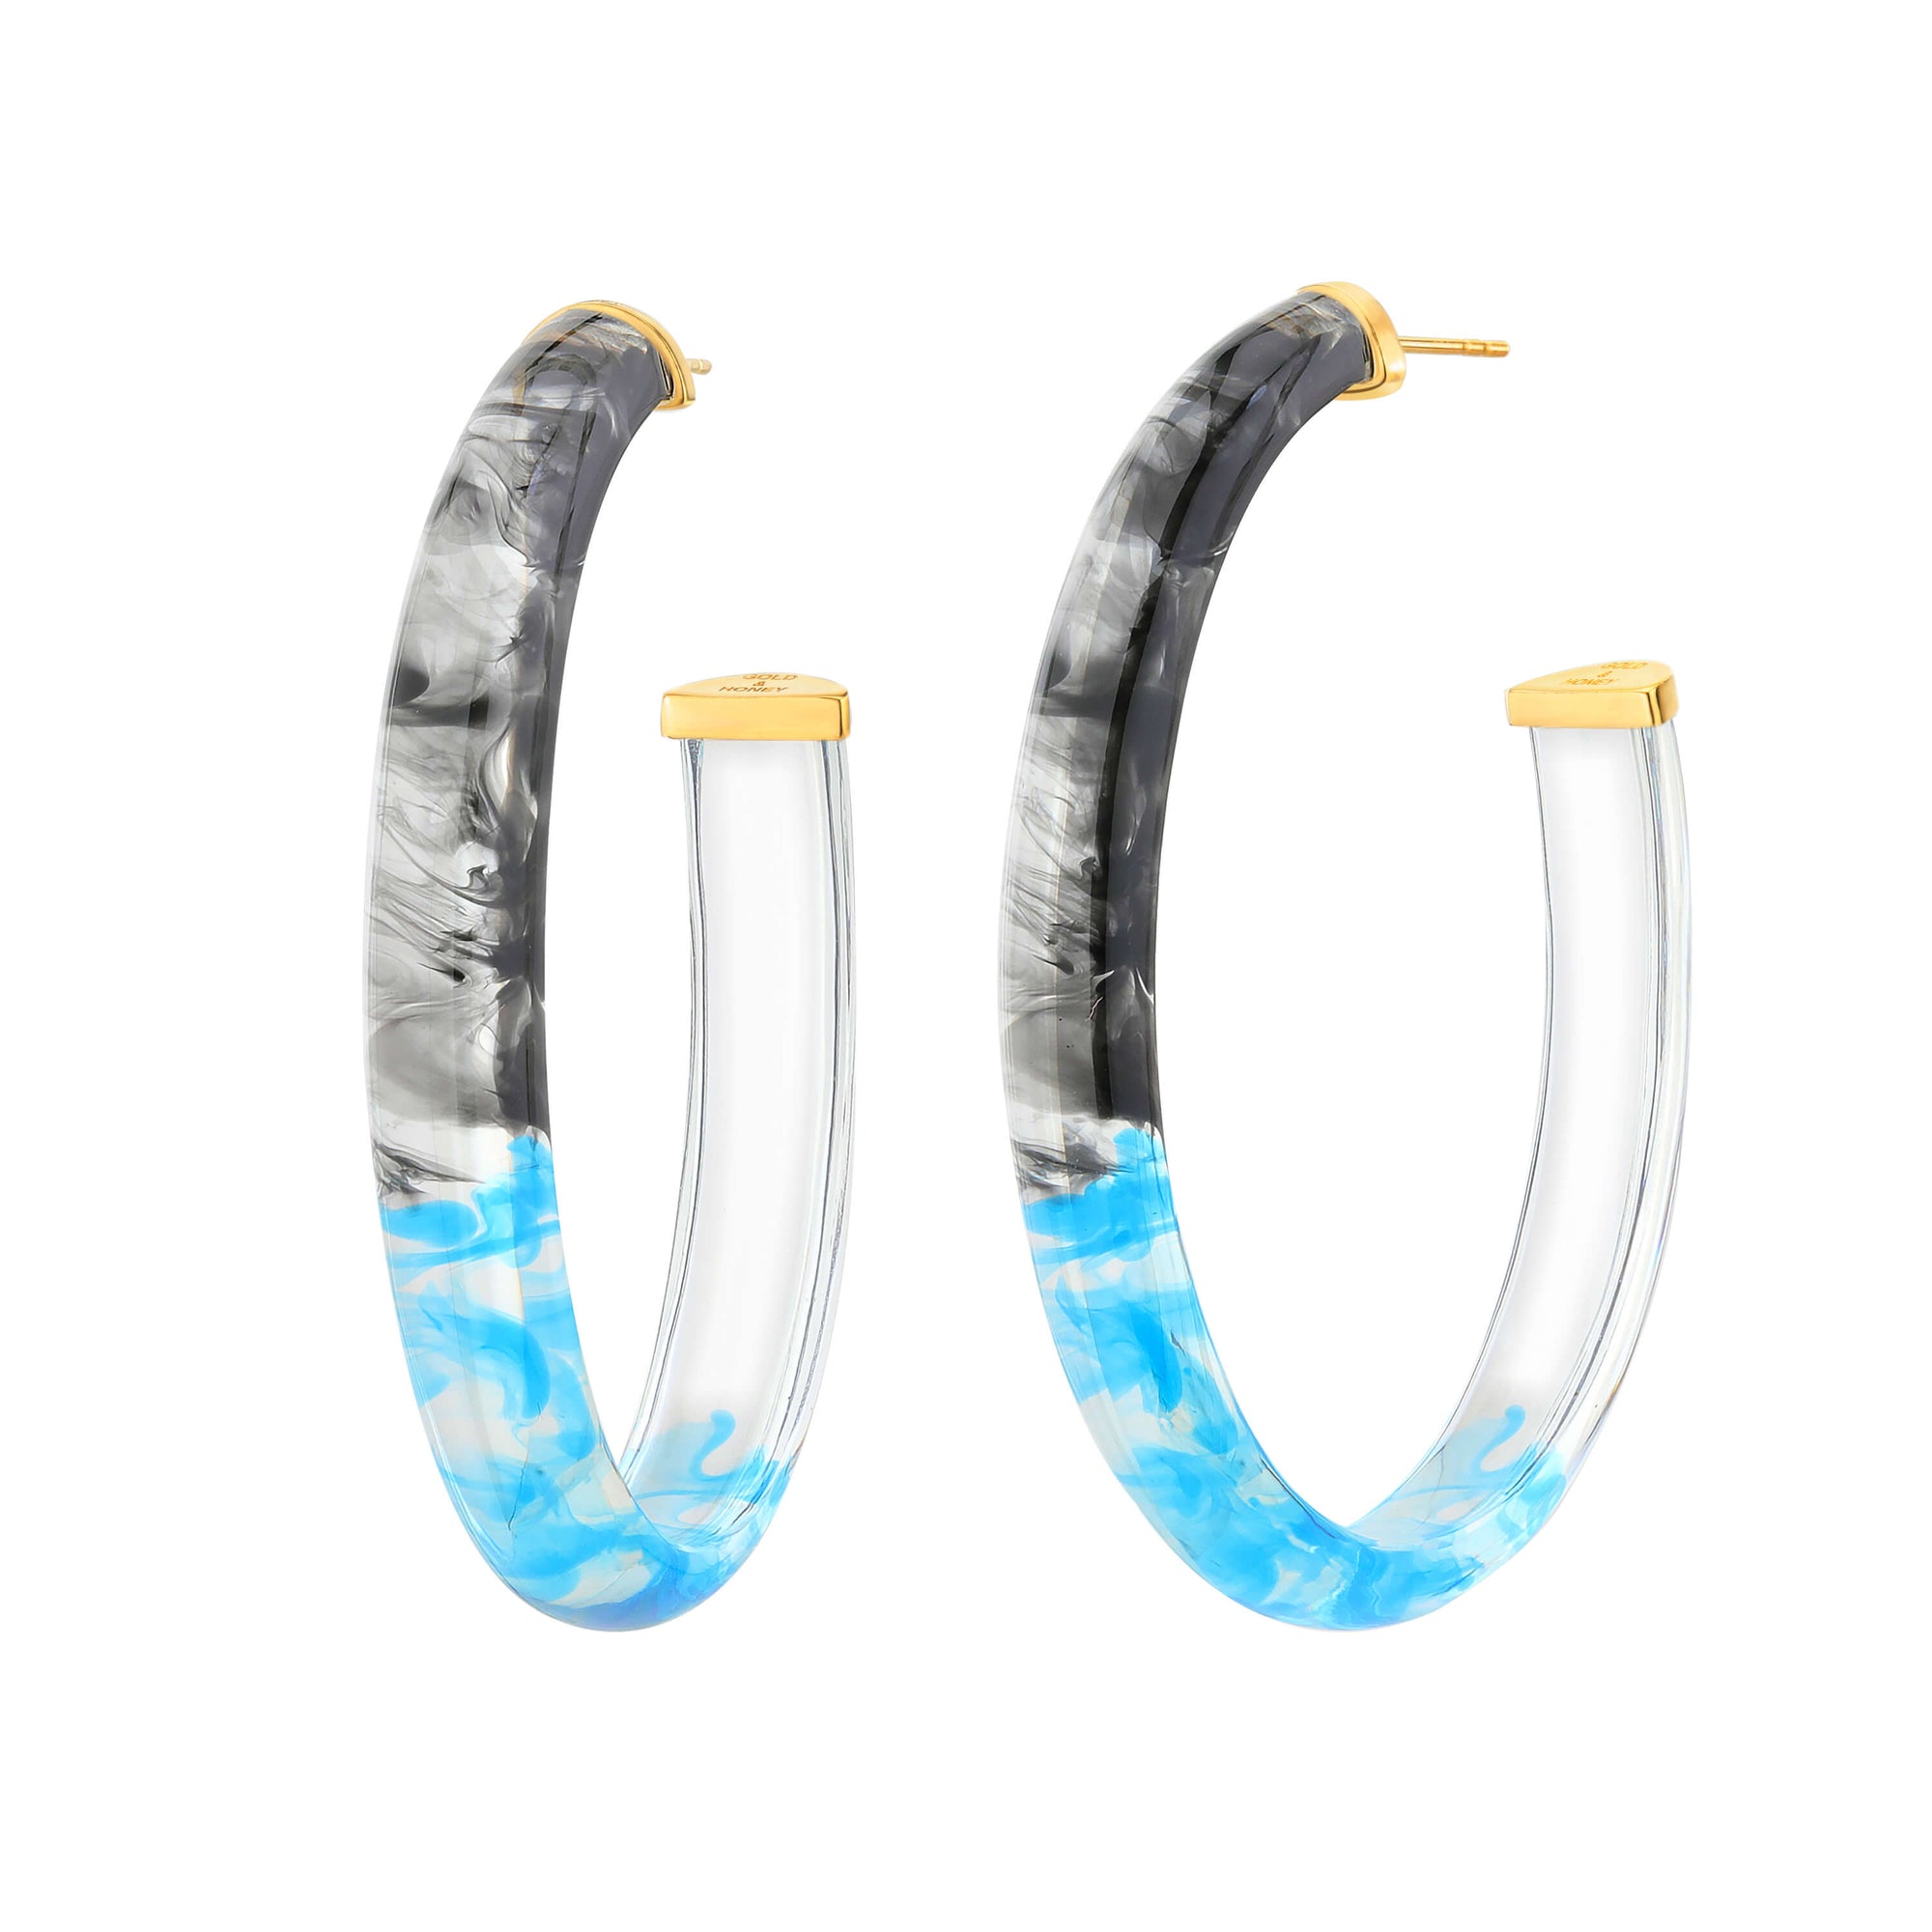 BLACK AND BLUE LUCITE HOOP EARRINGS - GAME DAY COLORS